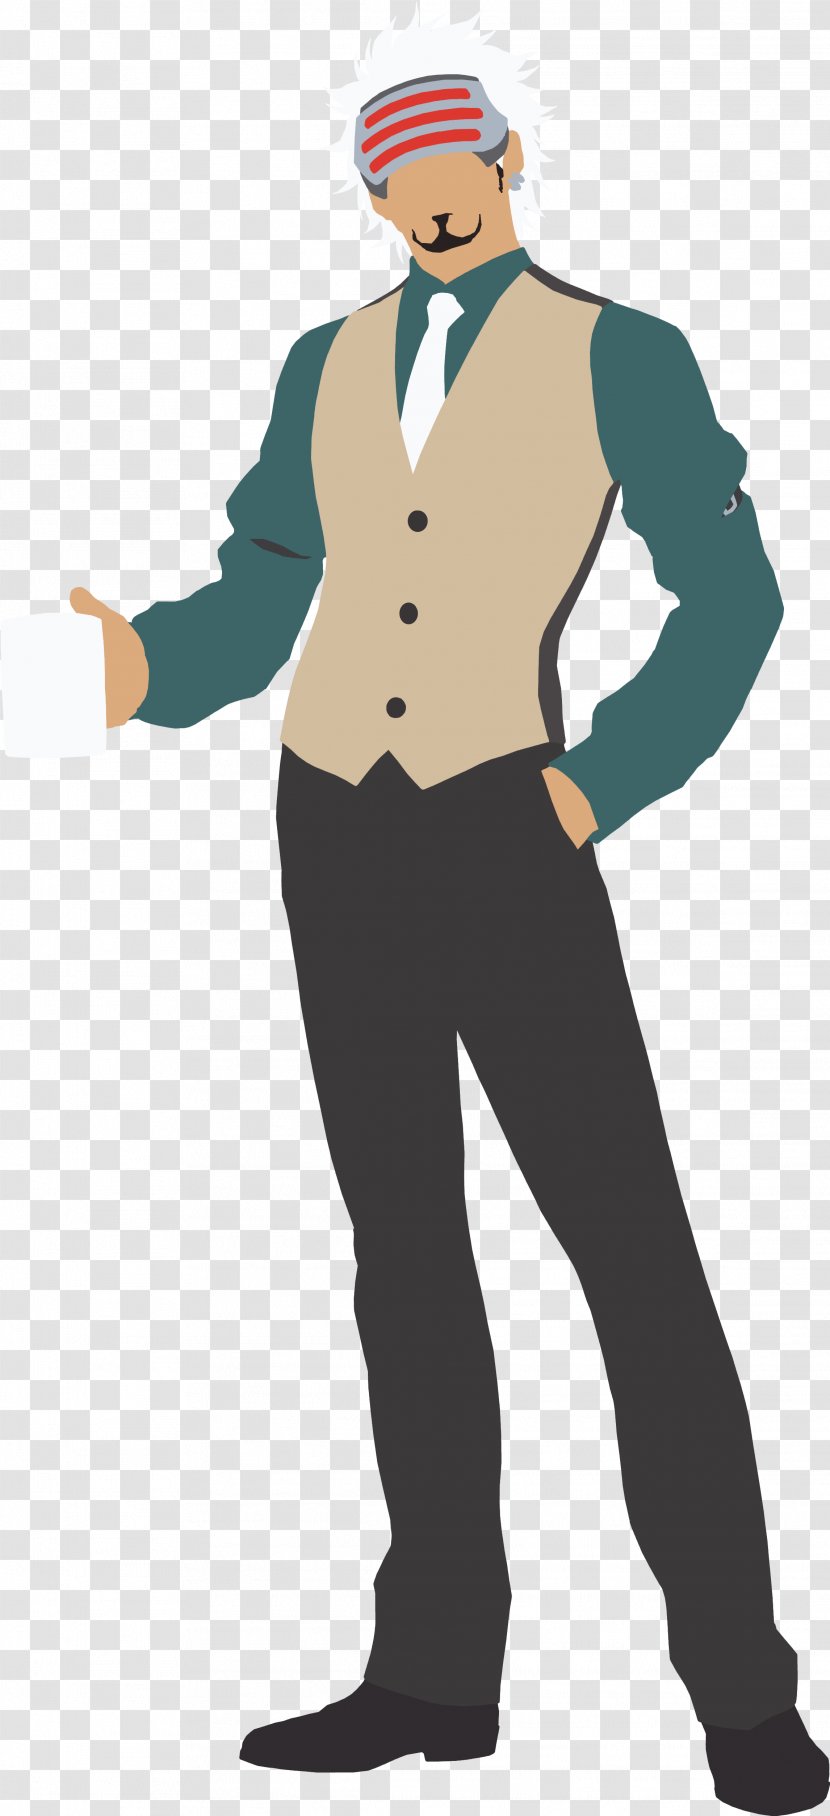 Phoenix Wright: Ace Attorney − Trials And Tribulations 6 Waiting For Godot - Shoe - Chase The Transparent PNG